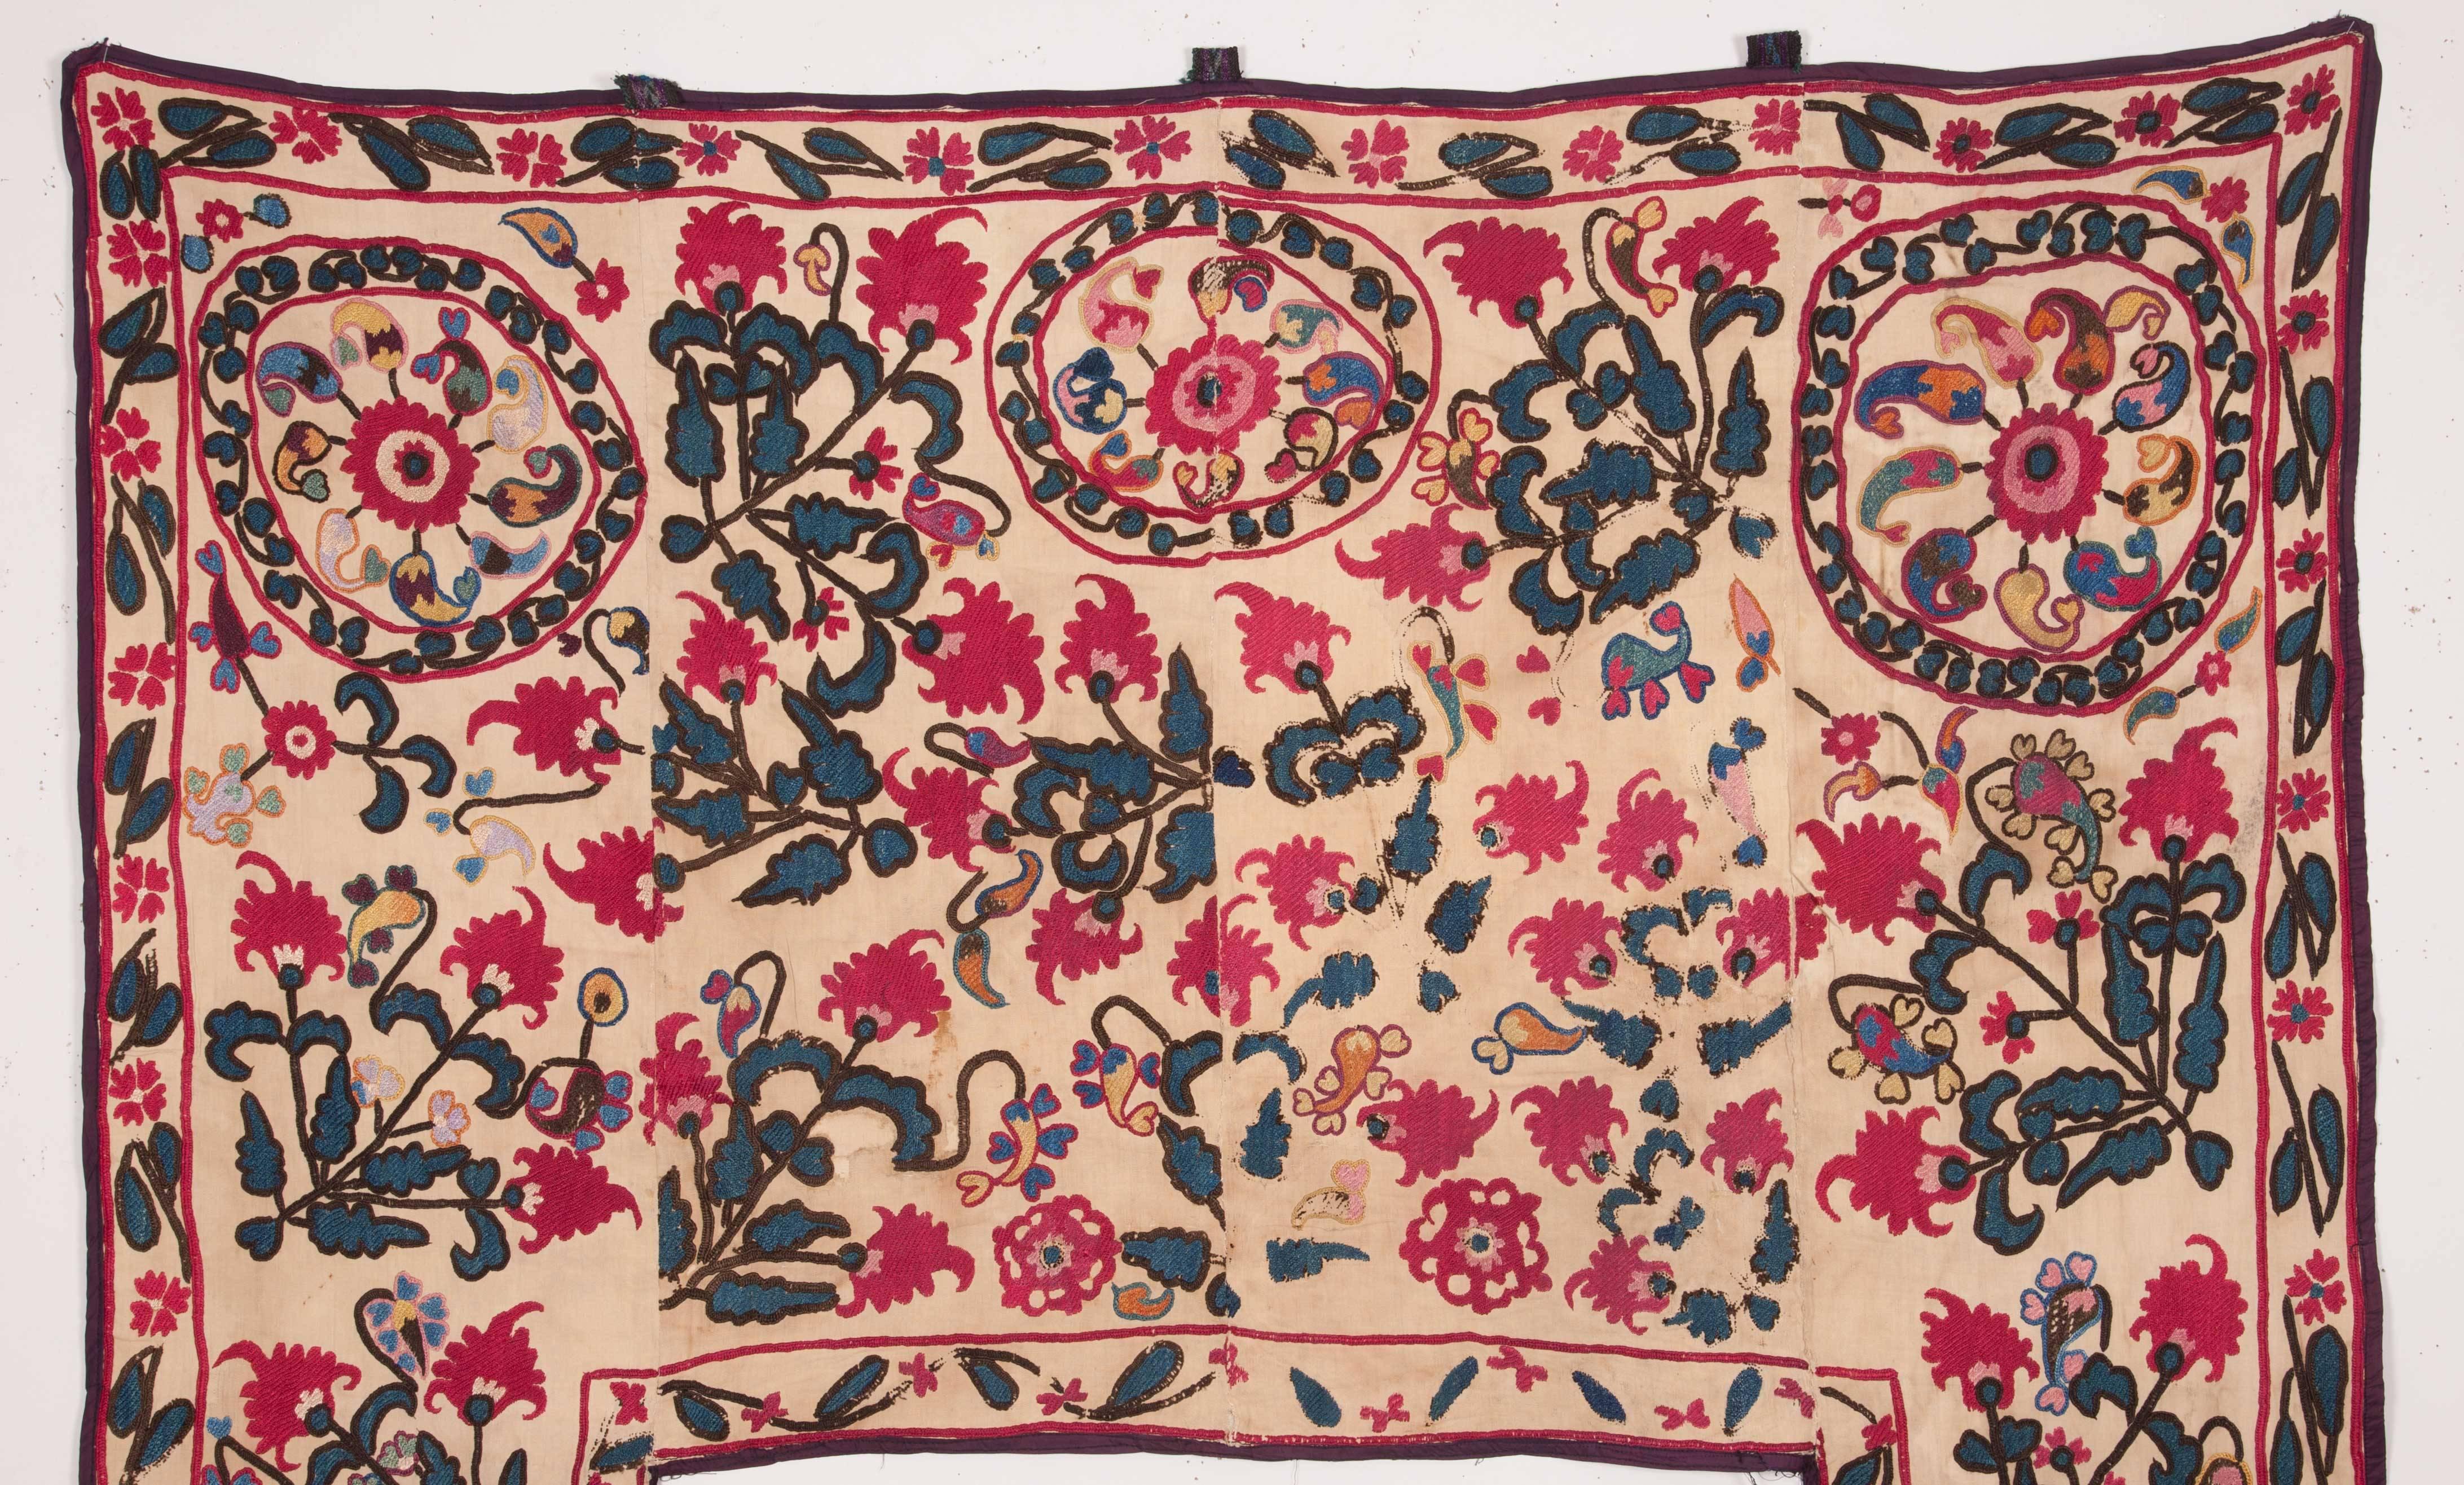 A naively drawn but professionally embroidered silk Suzani from Tajikistan.